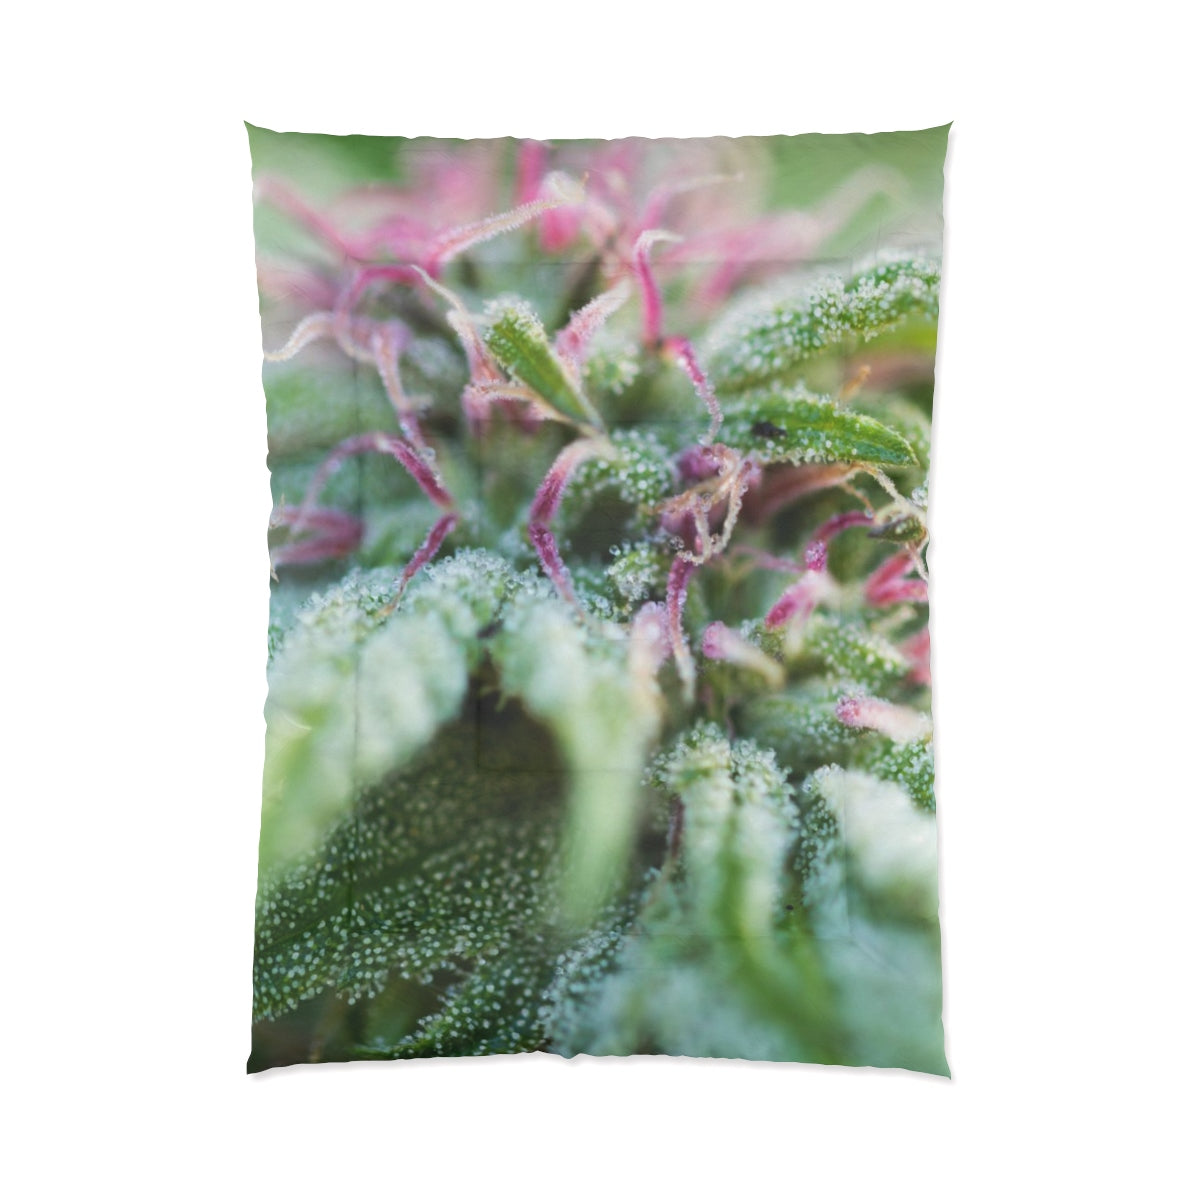 Blooming With Purple Cannabis Custom Designed Comforter.  A Unique Cannabis Gift For Friends & Family. Cannabis Decor For Your Home.